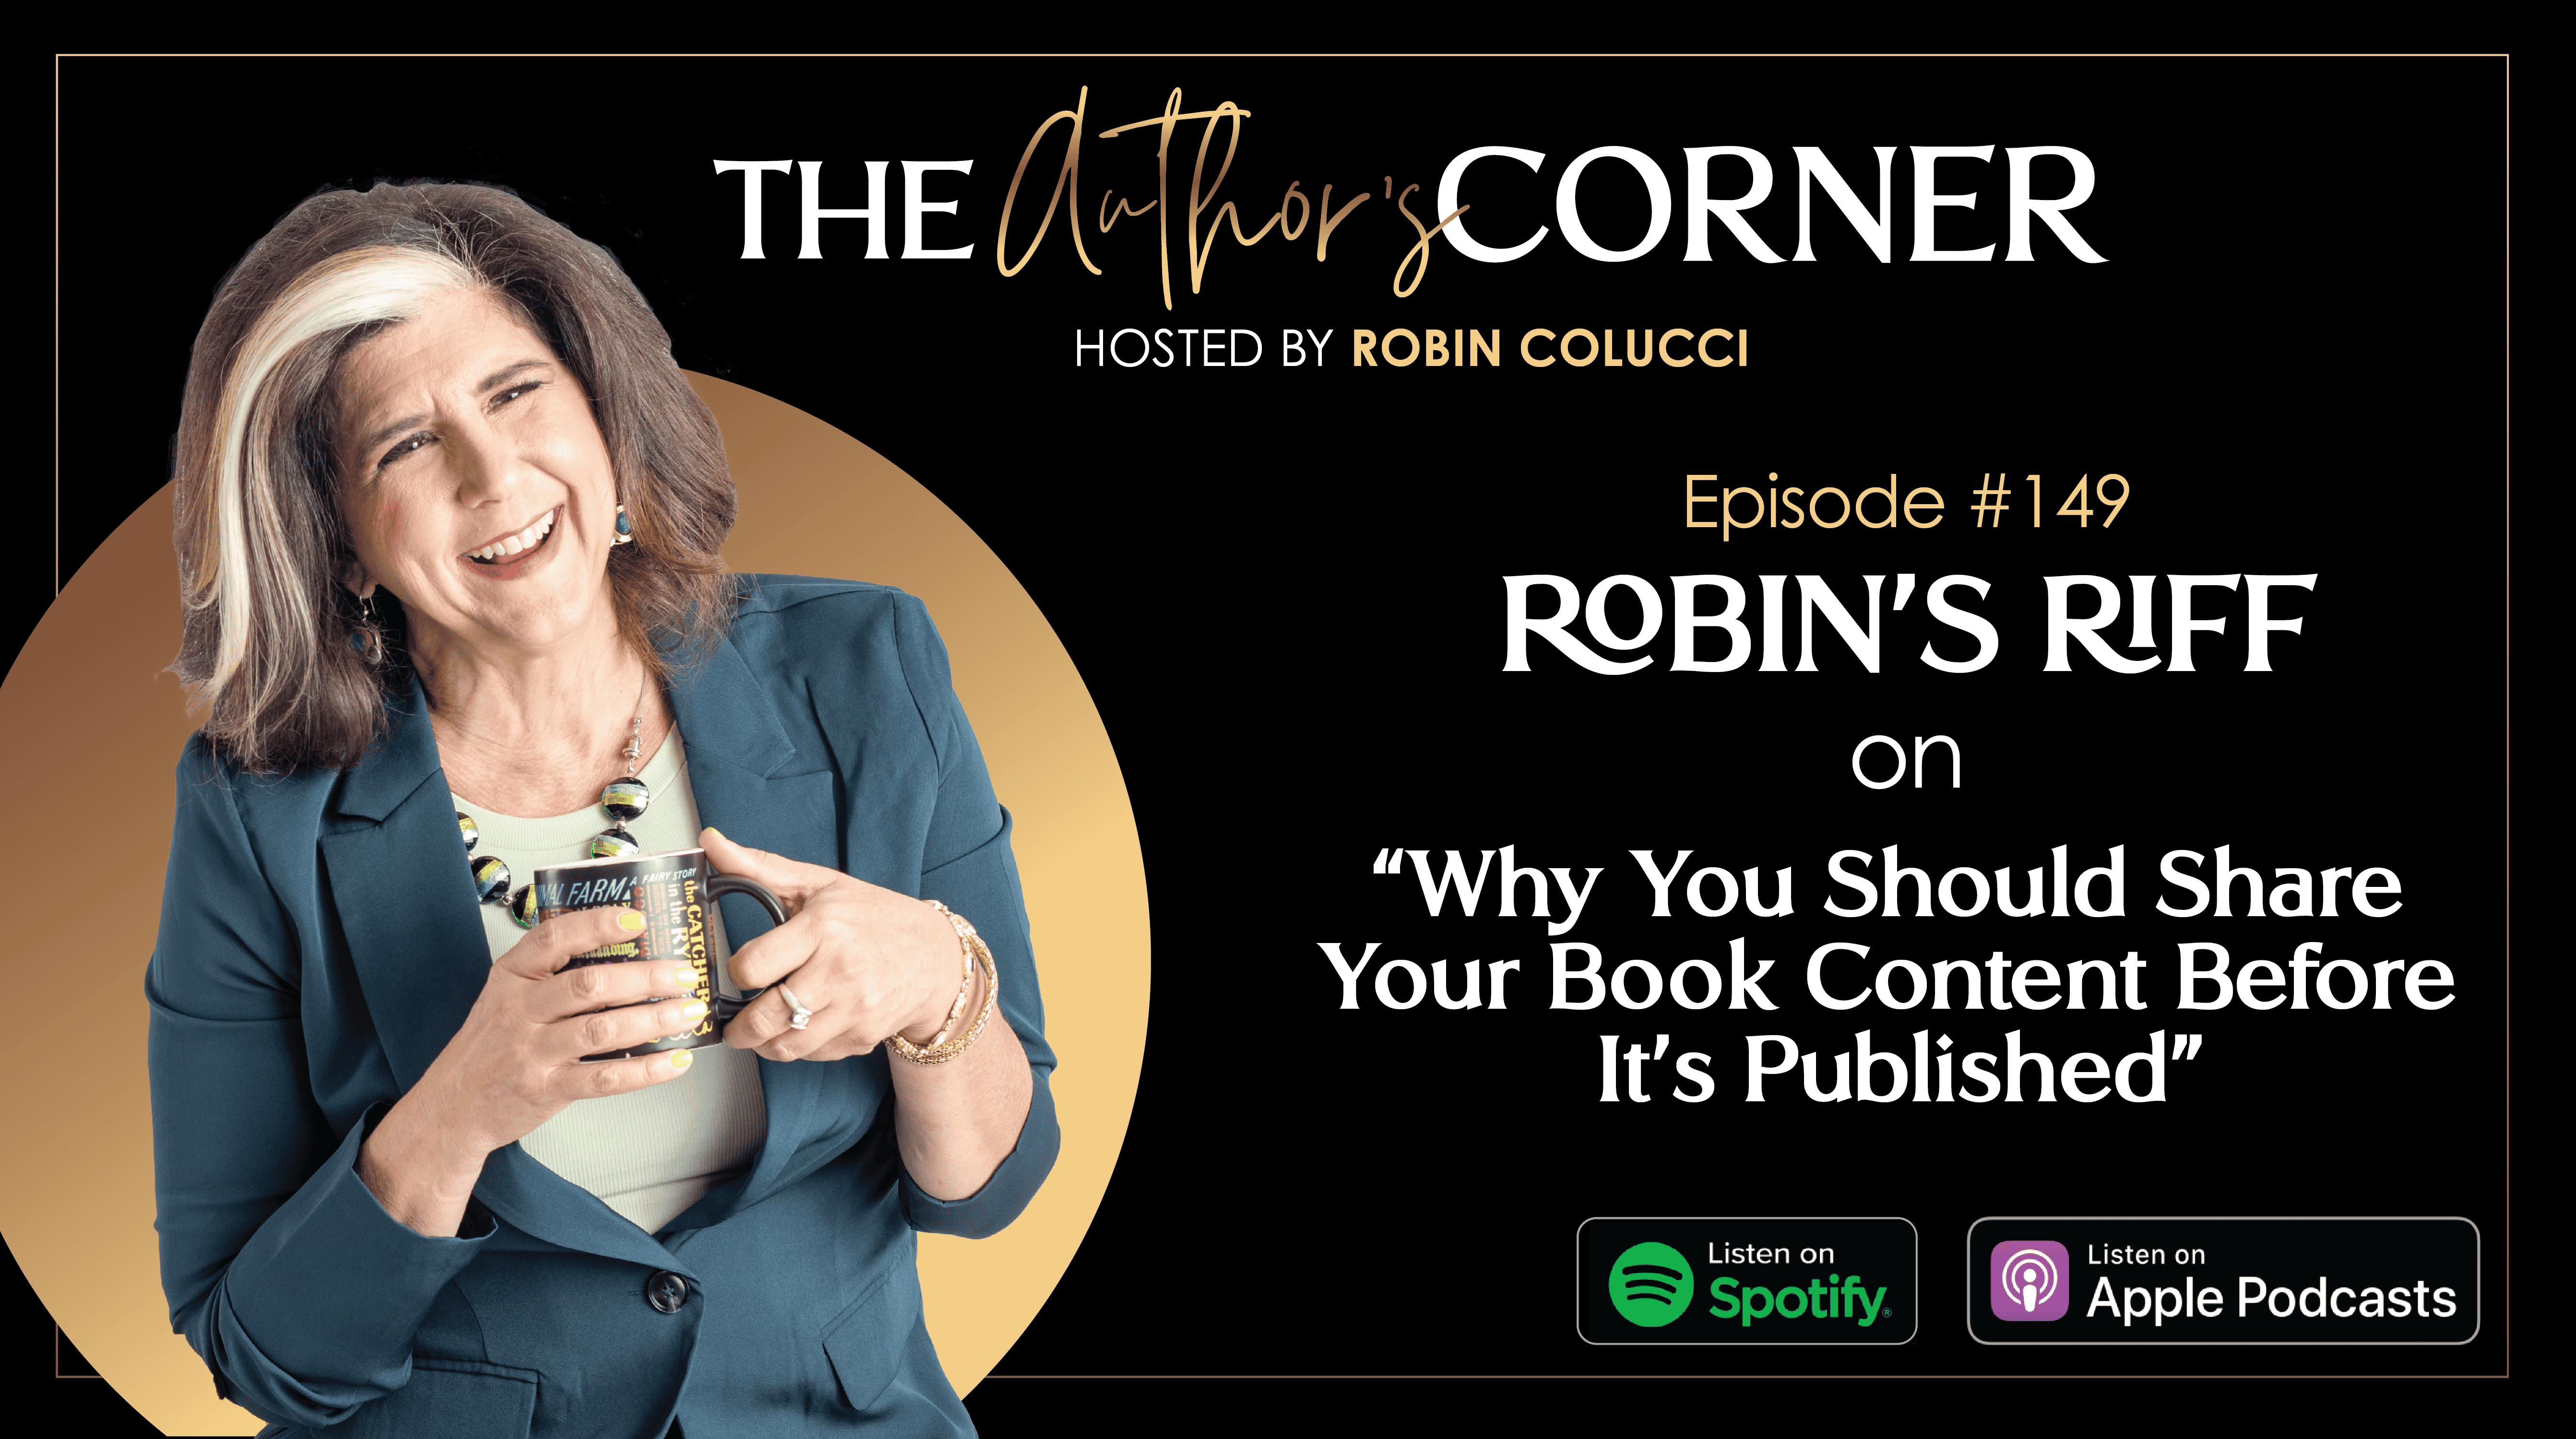 Robin's Riff on “Why You Should Share Your Book Content Before It's Published”